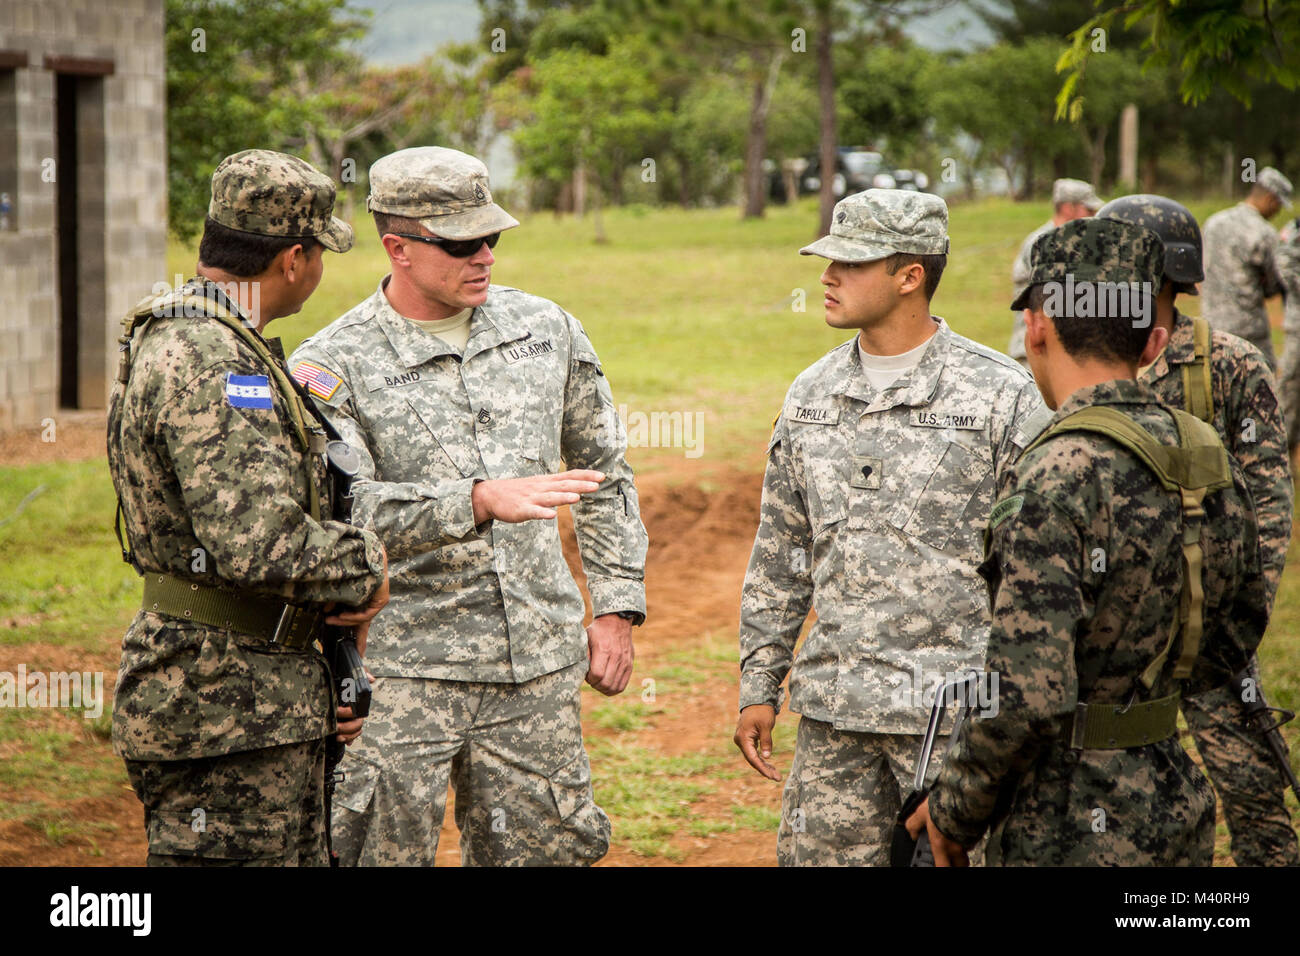 Staff Sgt. Jason Band (left) and Spec. Carlos Tafolla (right) work with Honduran soldiers during a training exercise in Tamara, Honduras. Both 36th Infantry Division soldiers are with the San Antonio-based 1st Battalion, 141st Infantry Regiment (Task Force Alamo), which is conducting the training to enhance the Honduran Army’s ability to counter transnational organized crime (CTOC). These Regionally Aligned Forces of the Texas Army National Guard are in Central America creating a knowledgeable and trained force that is able to detect, disrupt and detain illicit trafficking across the region. ( Stock Photo